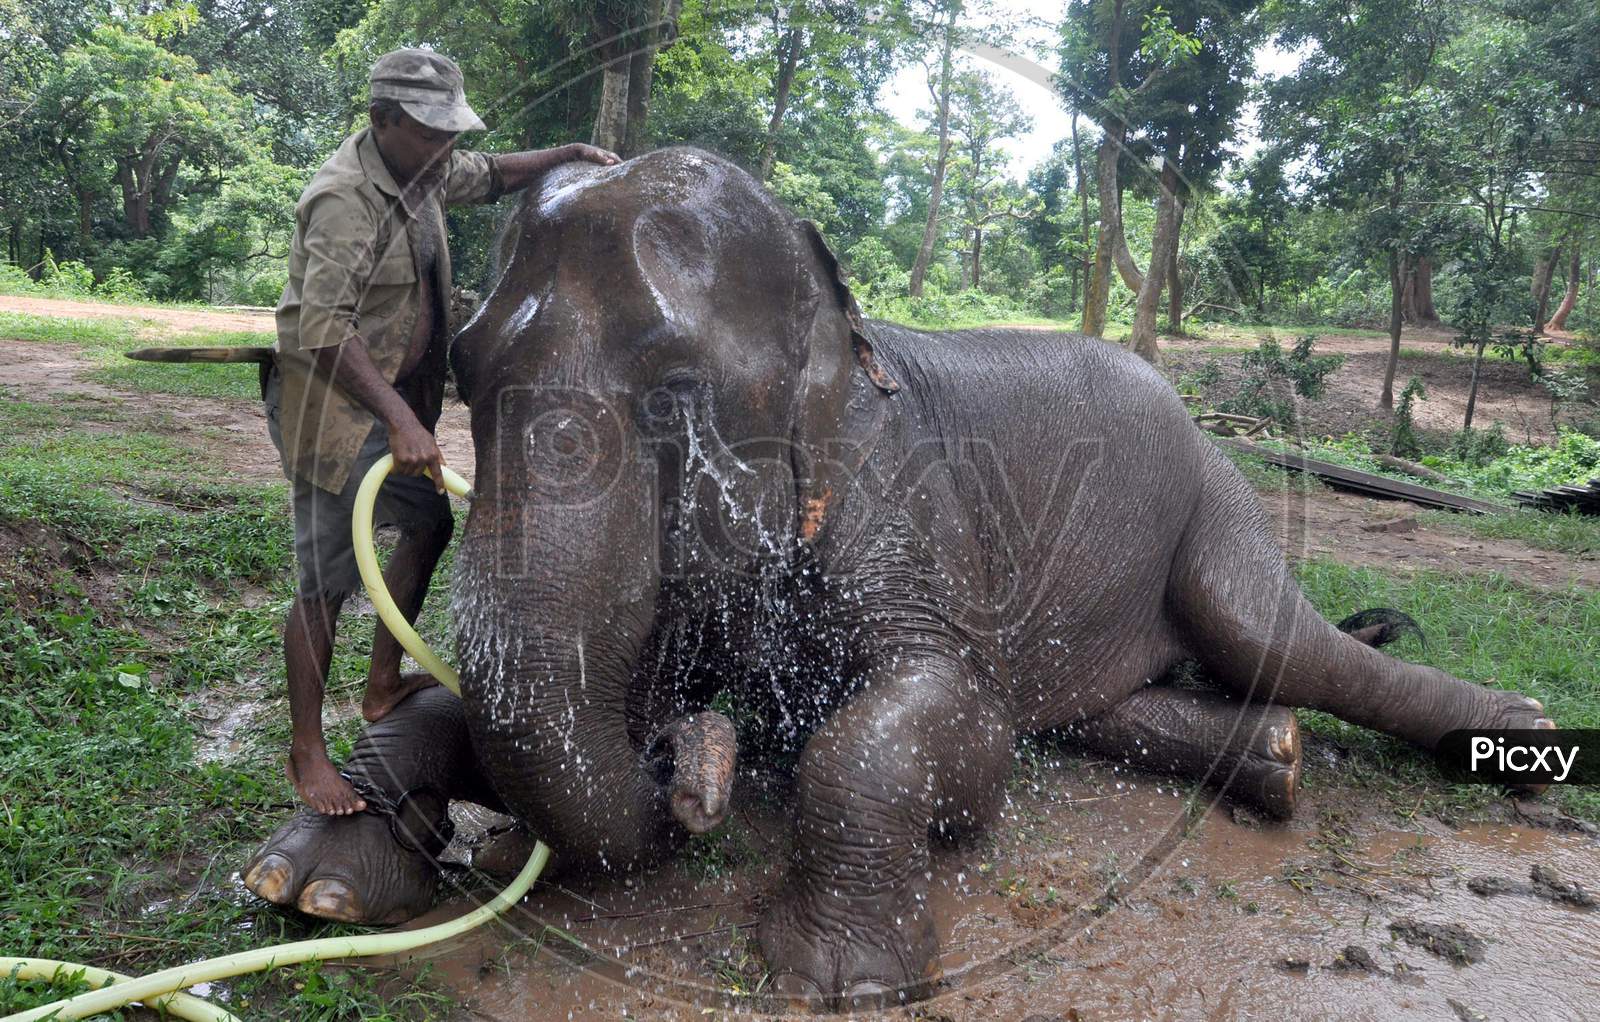 A Zookeeper Sprinkles Water On An Elephant As Mercury Rises In The City, At Assam State Zoo In Guwahati, Monday, Aug. 10, 2020. .